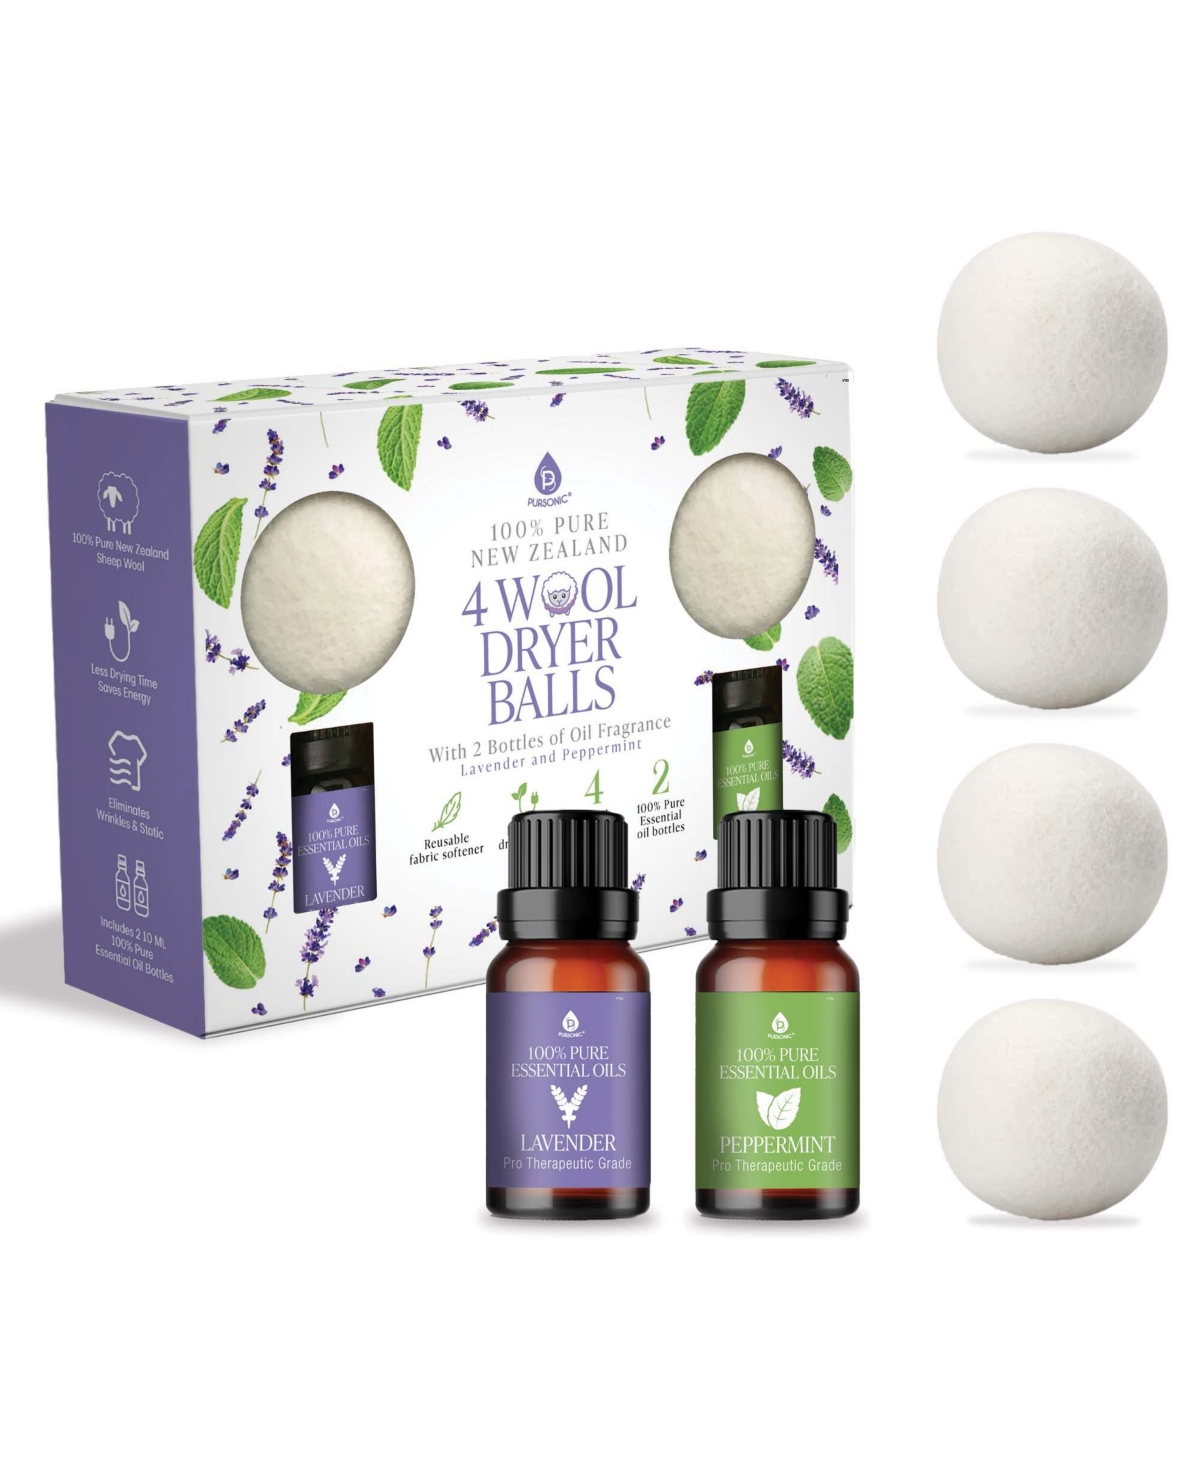 Wool Dryer Balls Bundle - Reusable Laundry Balls Made from Pure New Zealand Wool - Includes Lavender & Peppermint Oils. - Open Miscellaneous